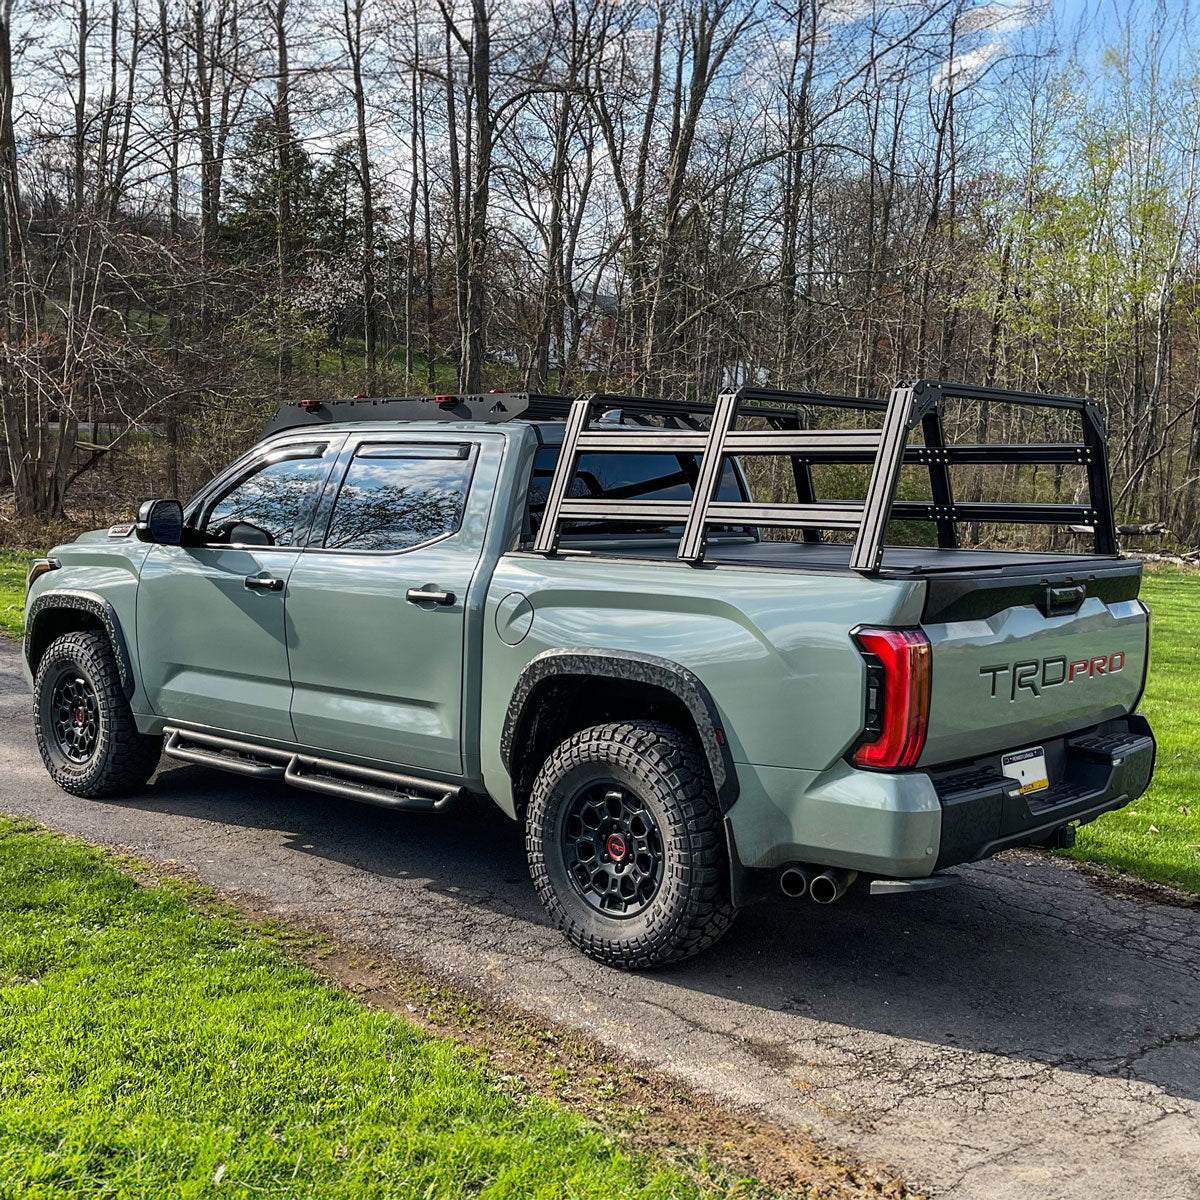 Toyota Tundra TRD Pro with XTR3 bed rack and Retrax XR Tonneau Cover